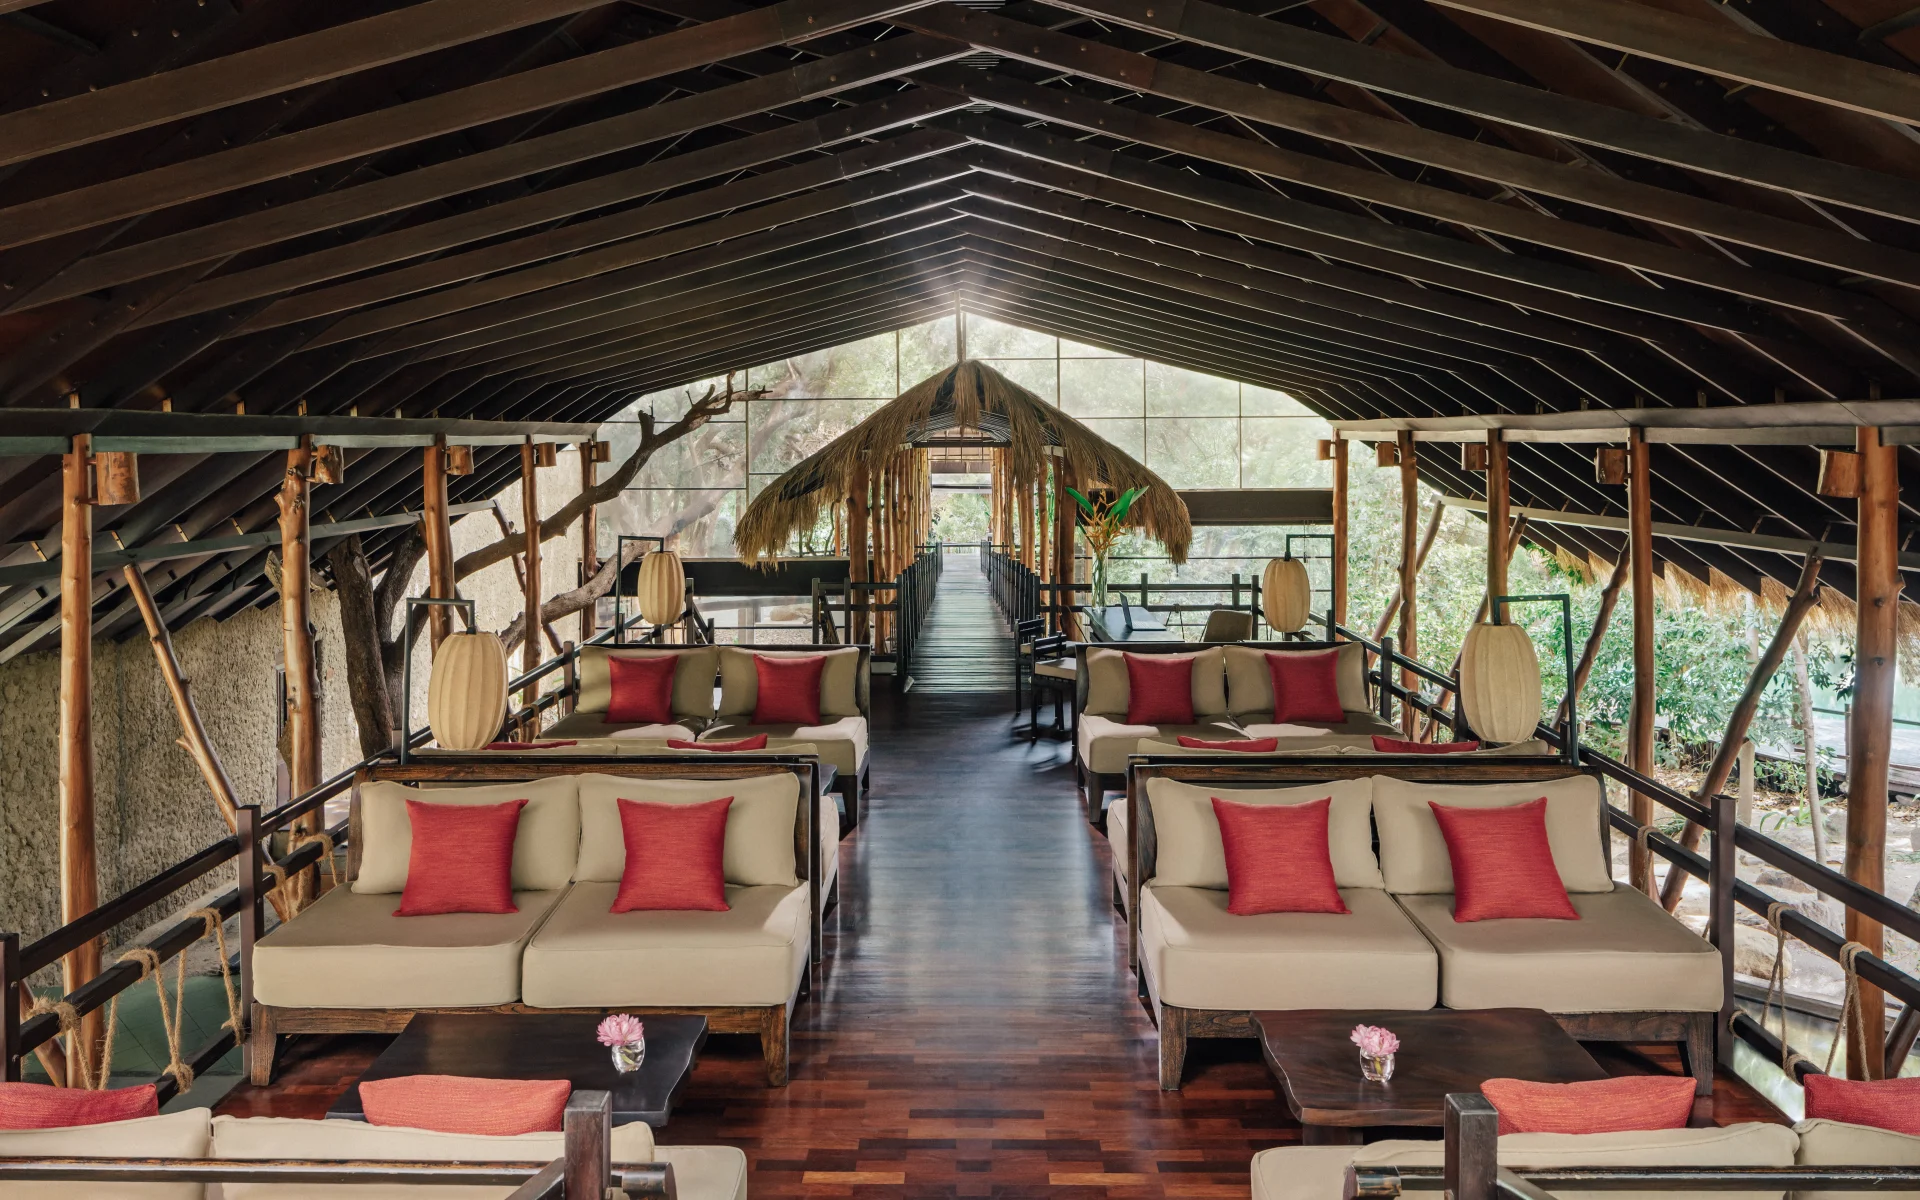 The resort lobby is comfortable and situated in a stilted hut, equipped with comfy sofas.